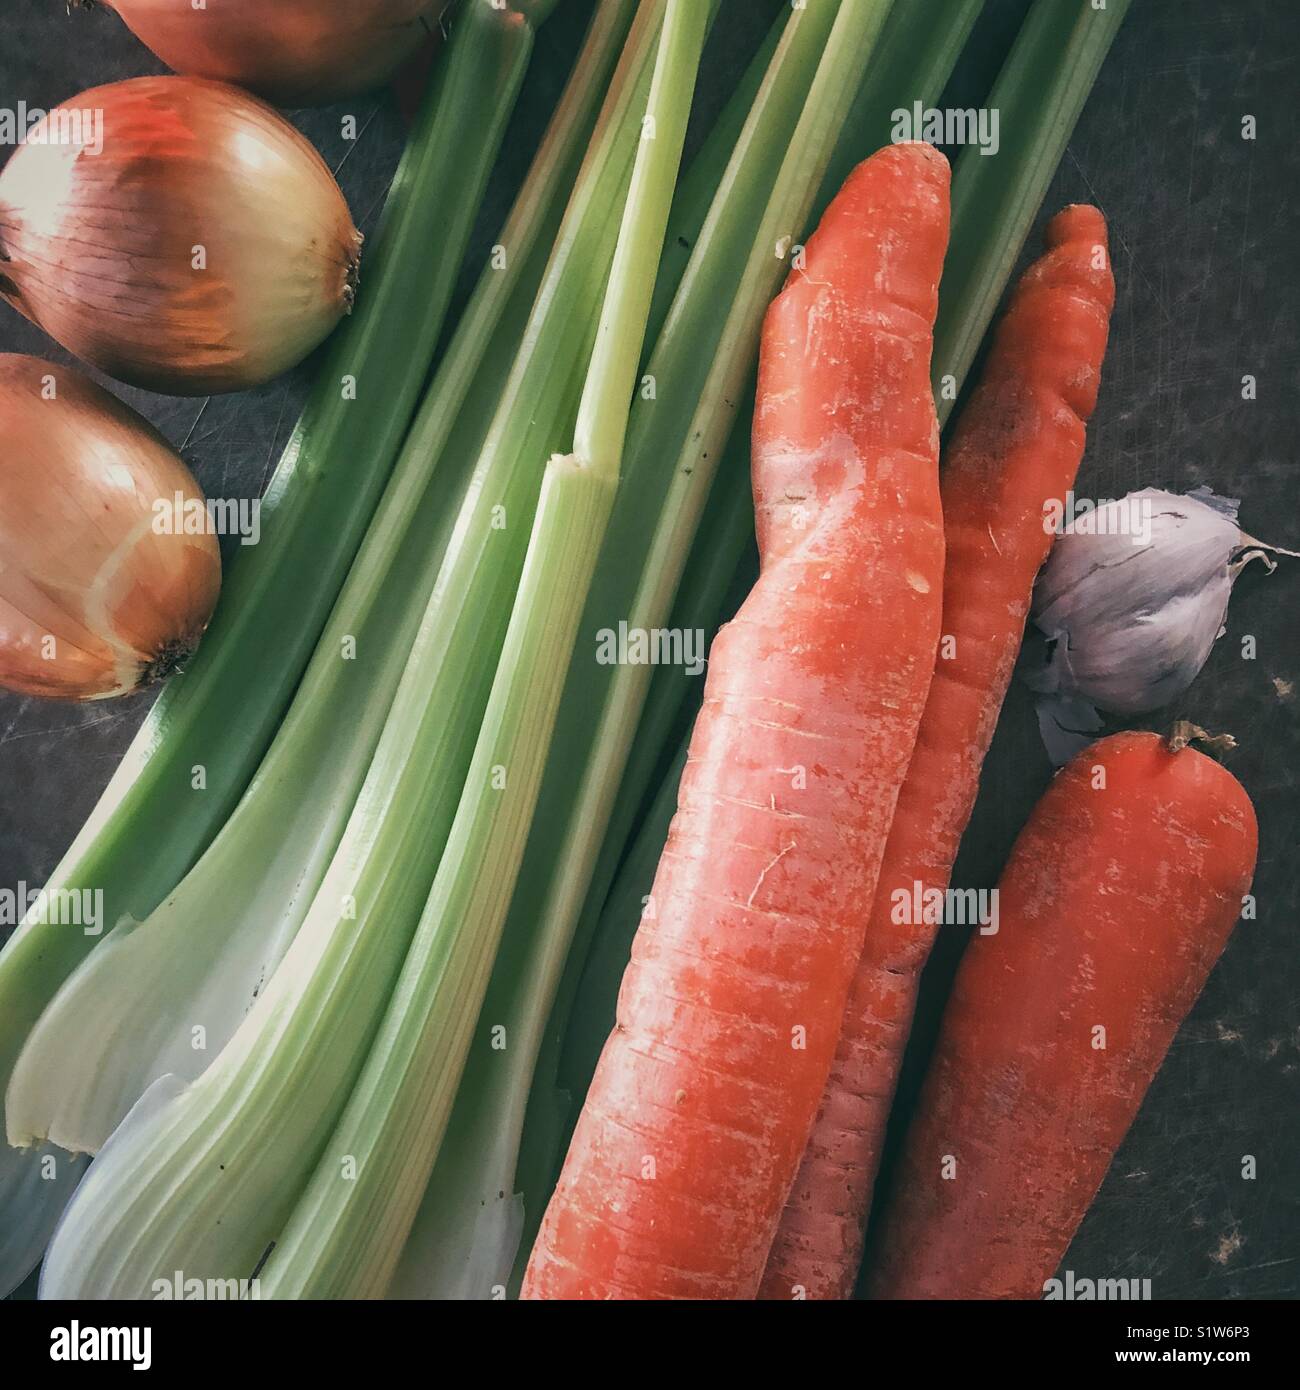 Fresh onions, celery stalks, large carrots, and garlic bulb on a brown cutting board Stock Photo